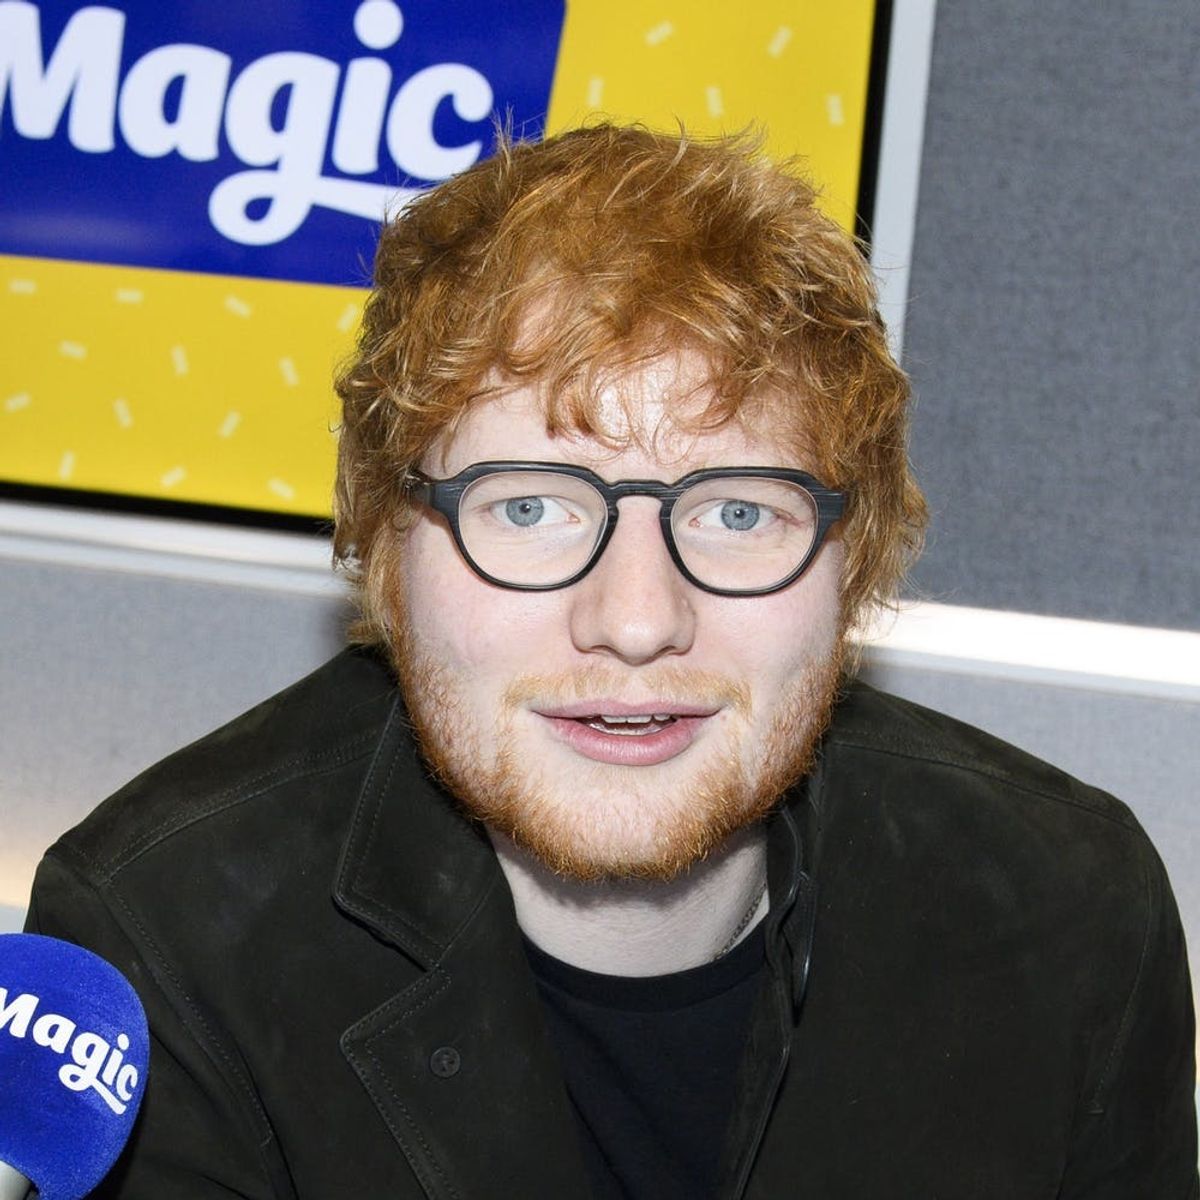 Ed Sheeran Just Gave Taylor Swift’s BF Joe Alwyn His Stamp of Approval